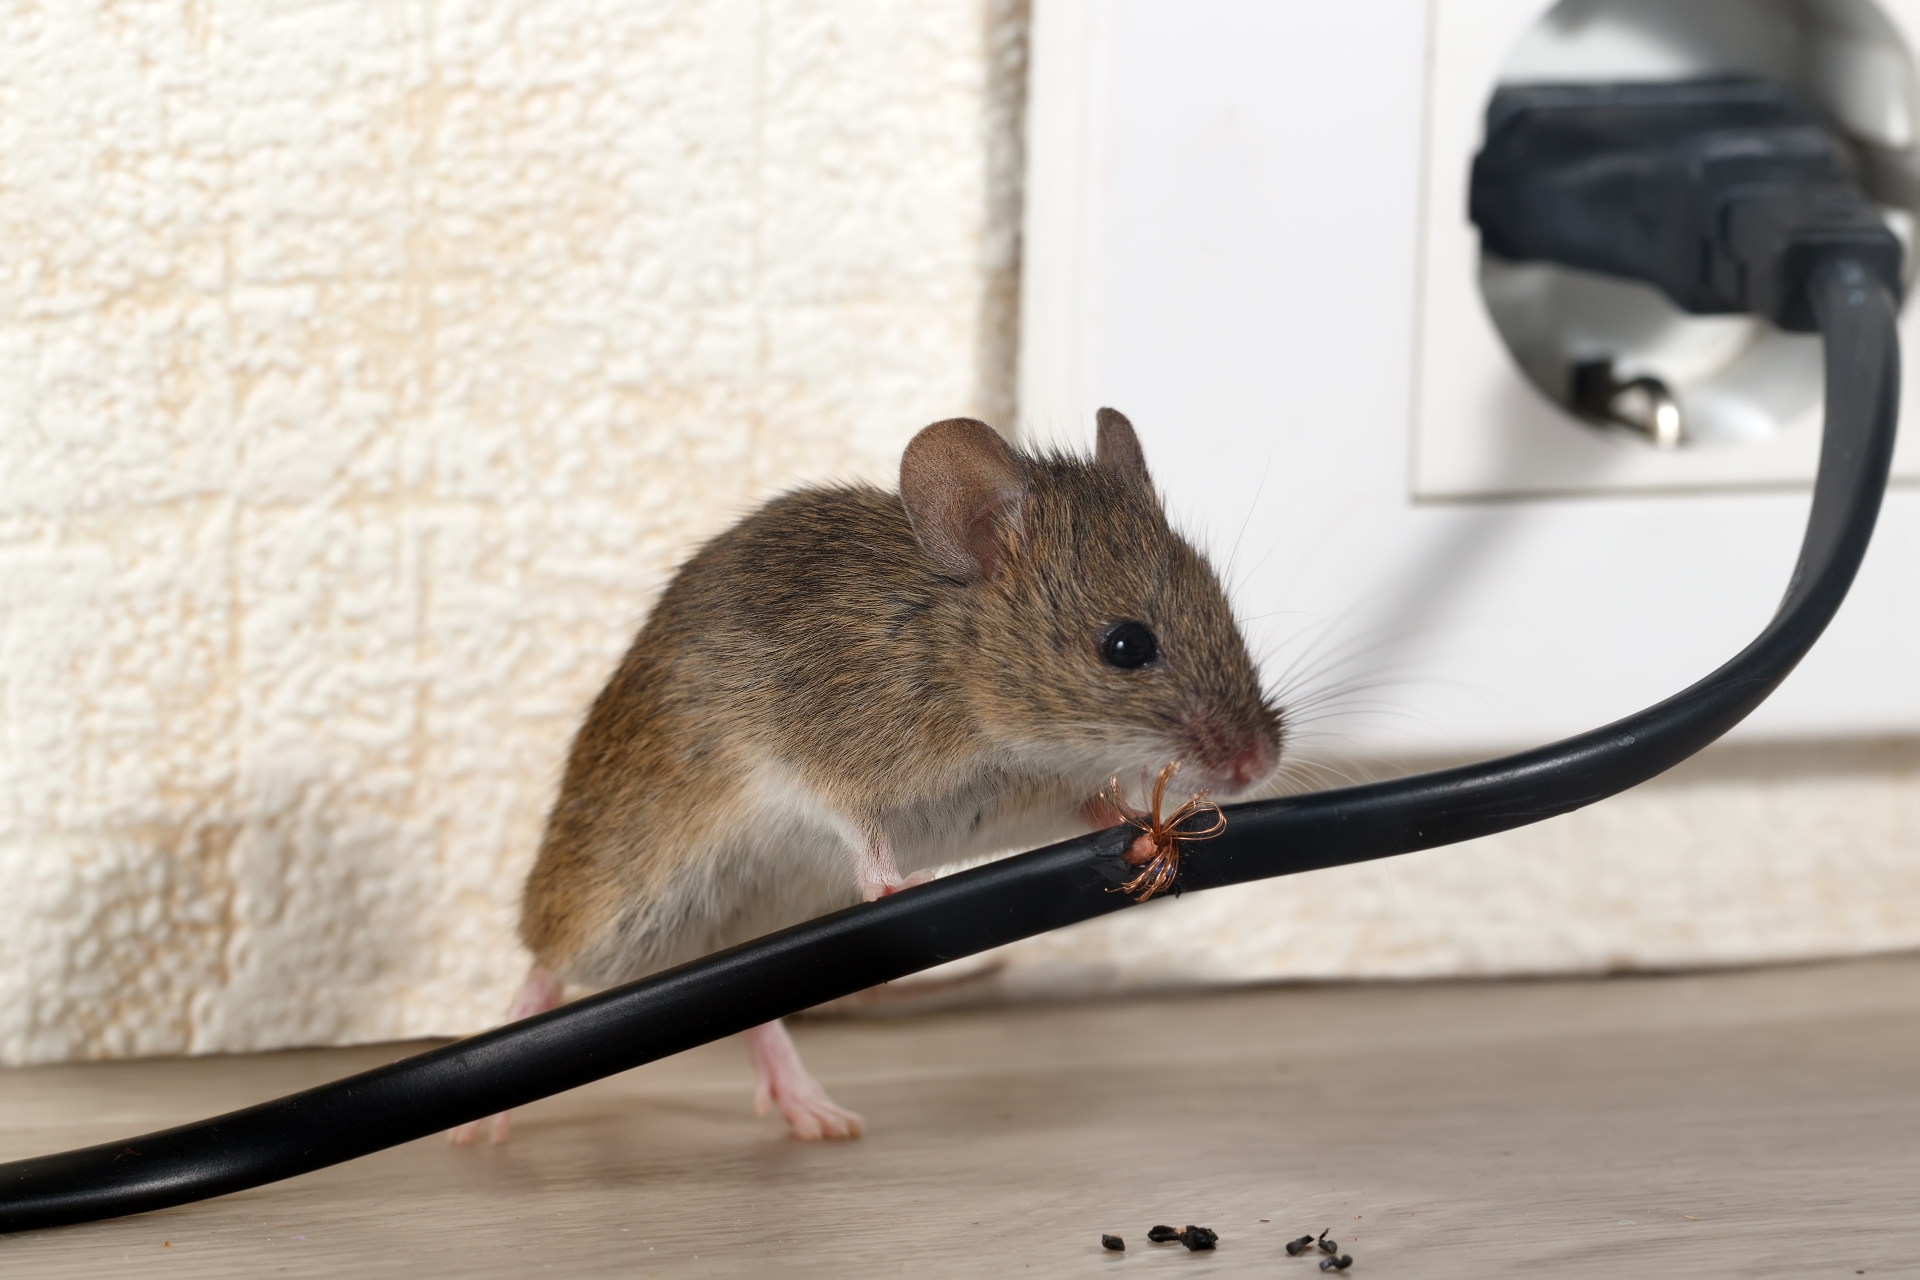 Mice Infestation, Pest Control in Pimlico, SW1. Call Now 020 8166 9746